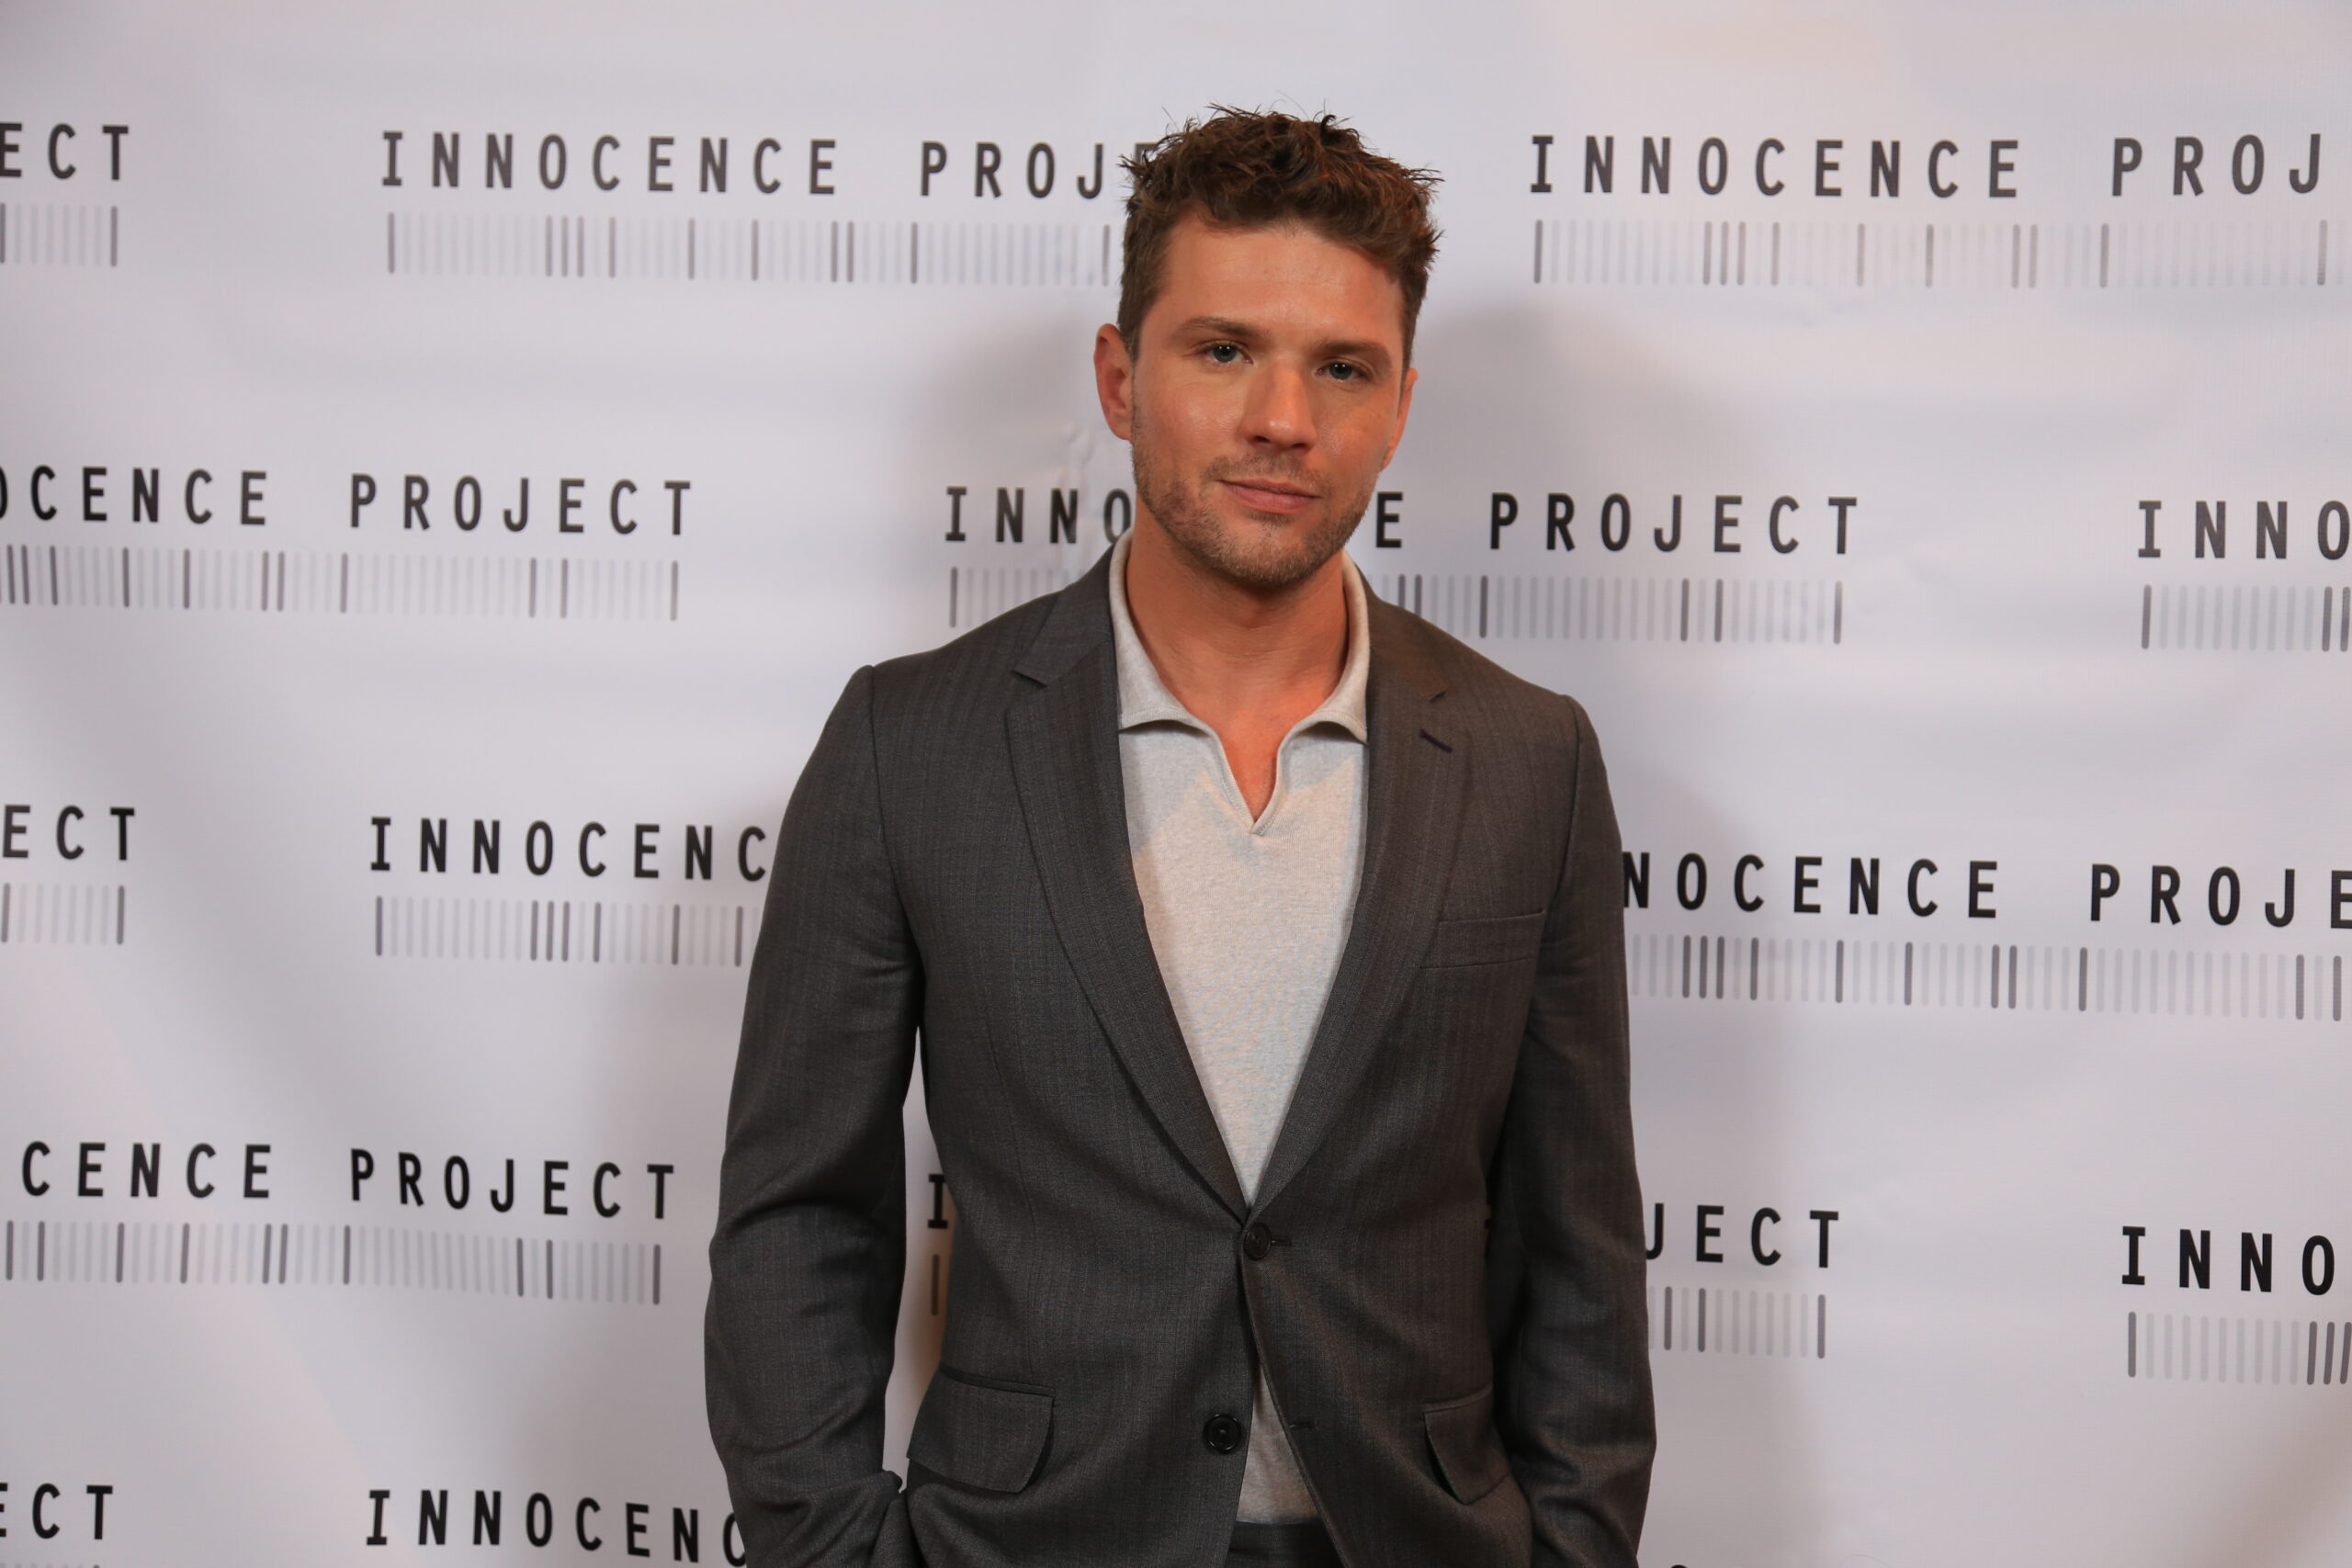 Innocence Blog Q&A with Ryan Phillippe